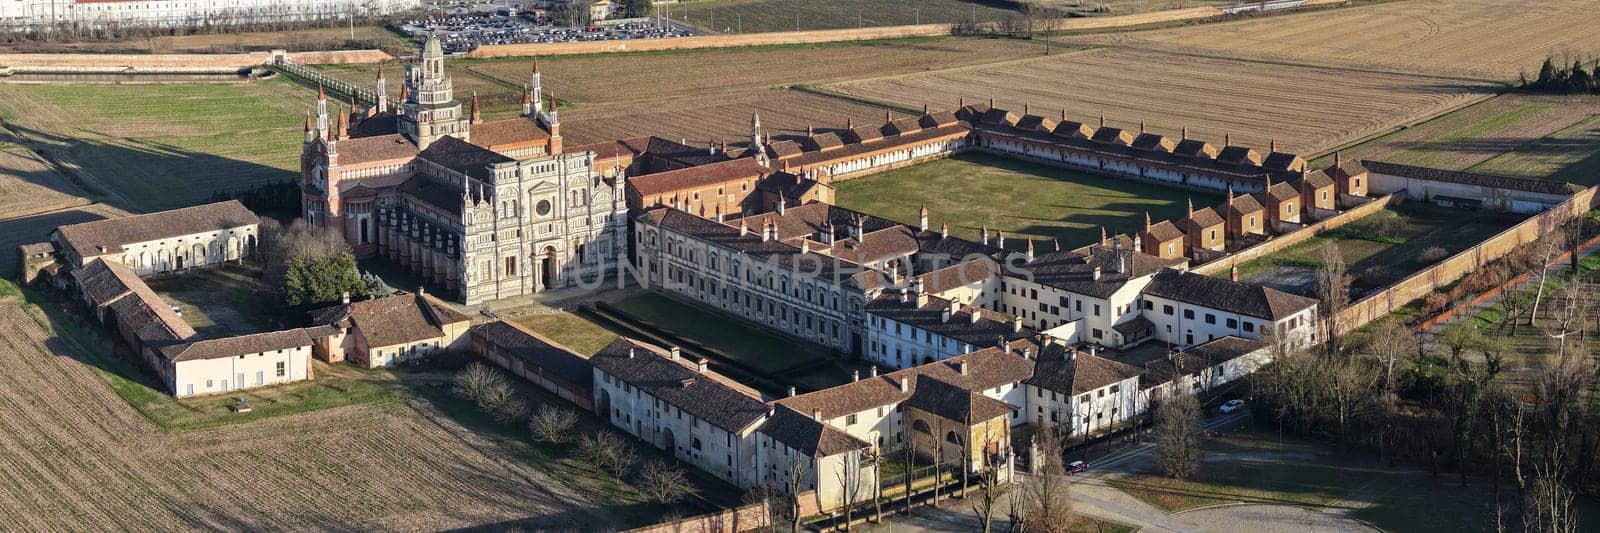 Aerial view of Certosa of Pavia monastery and sanctuary by Robertobinetti70